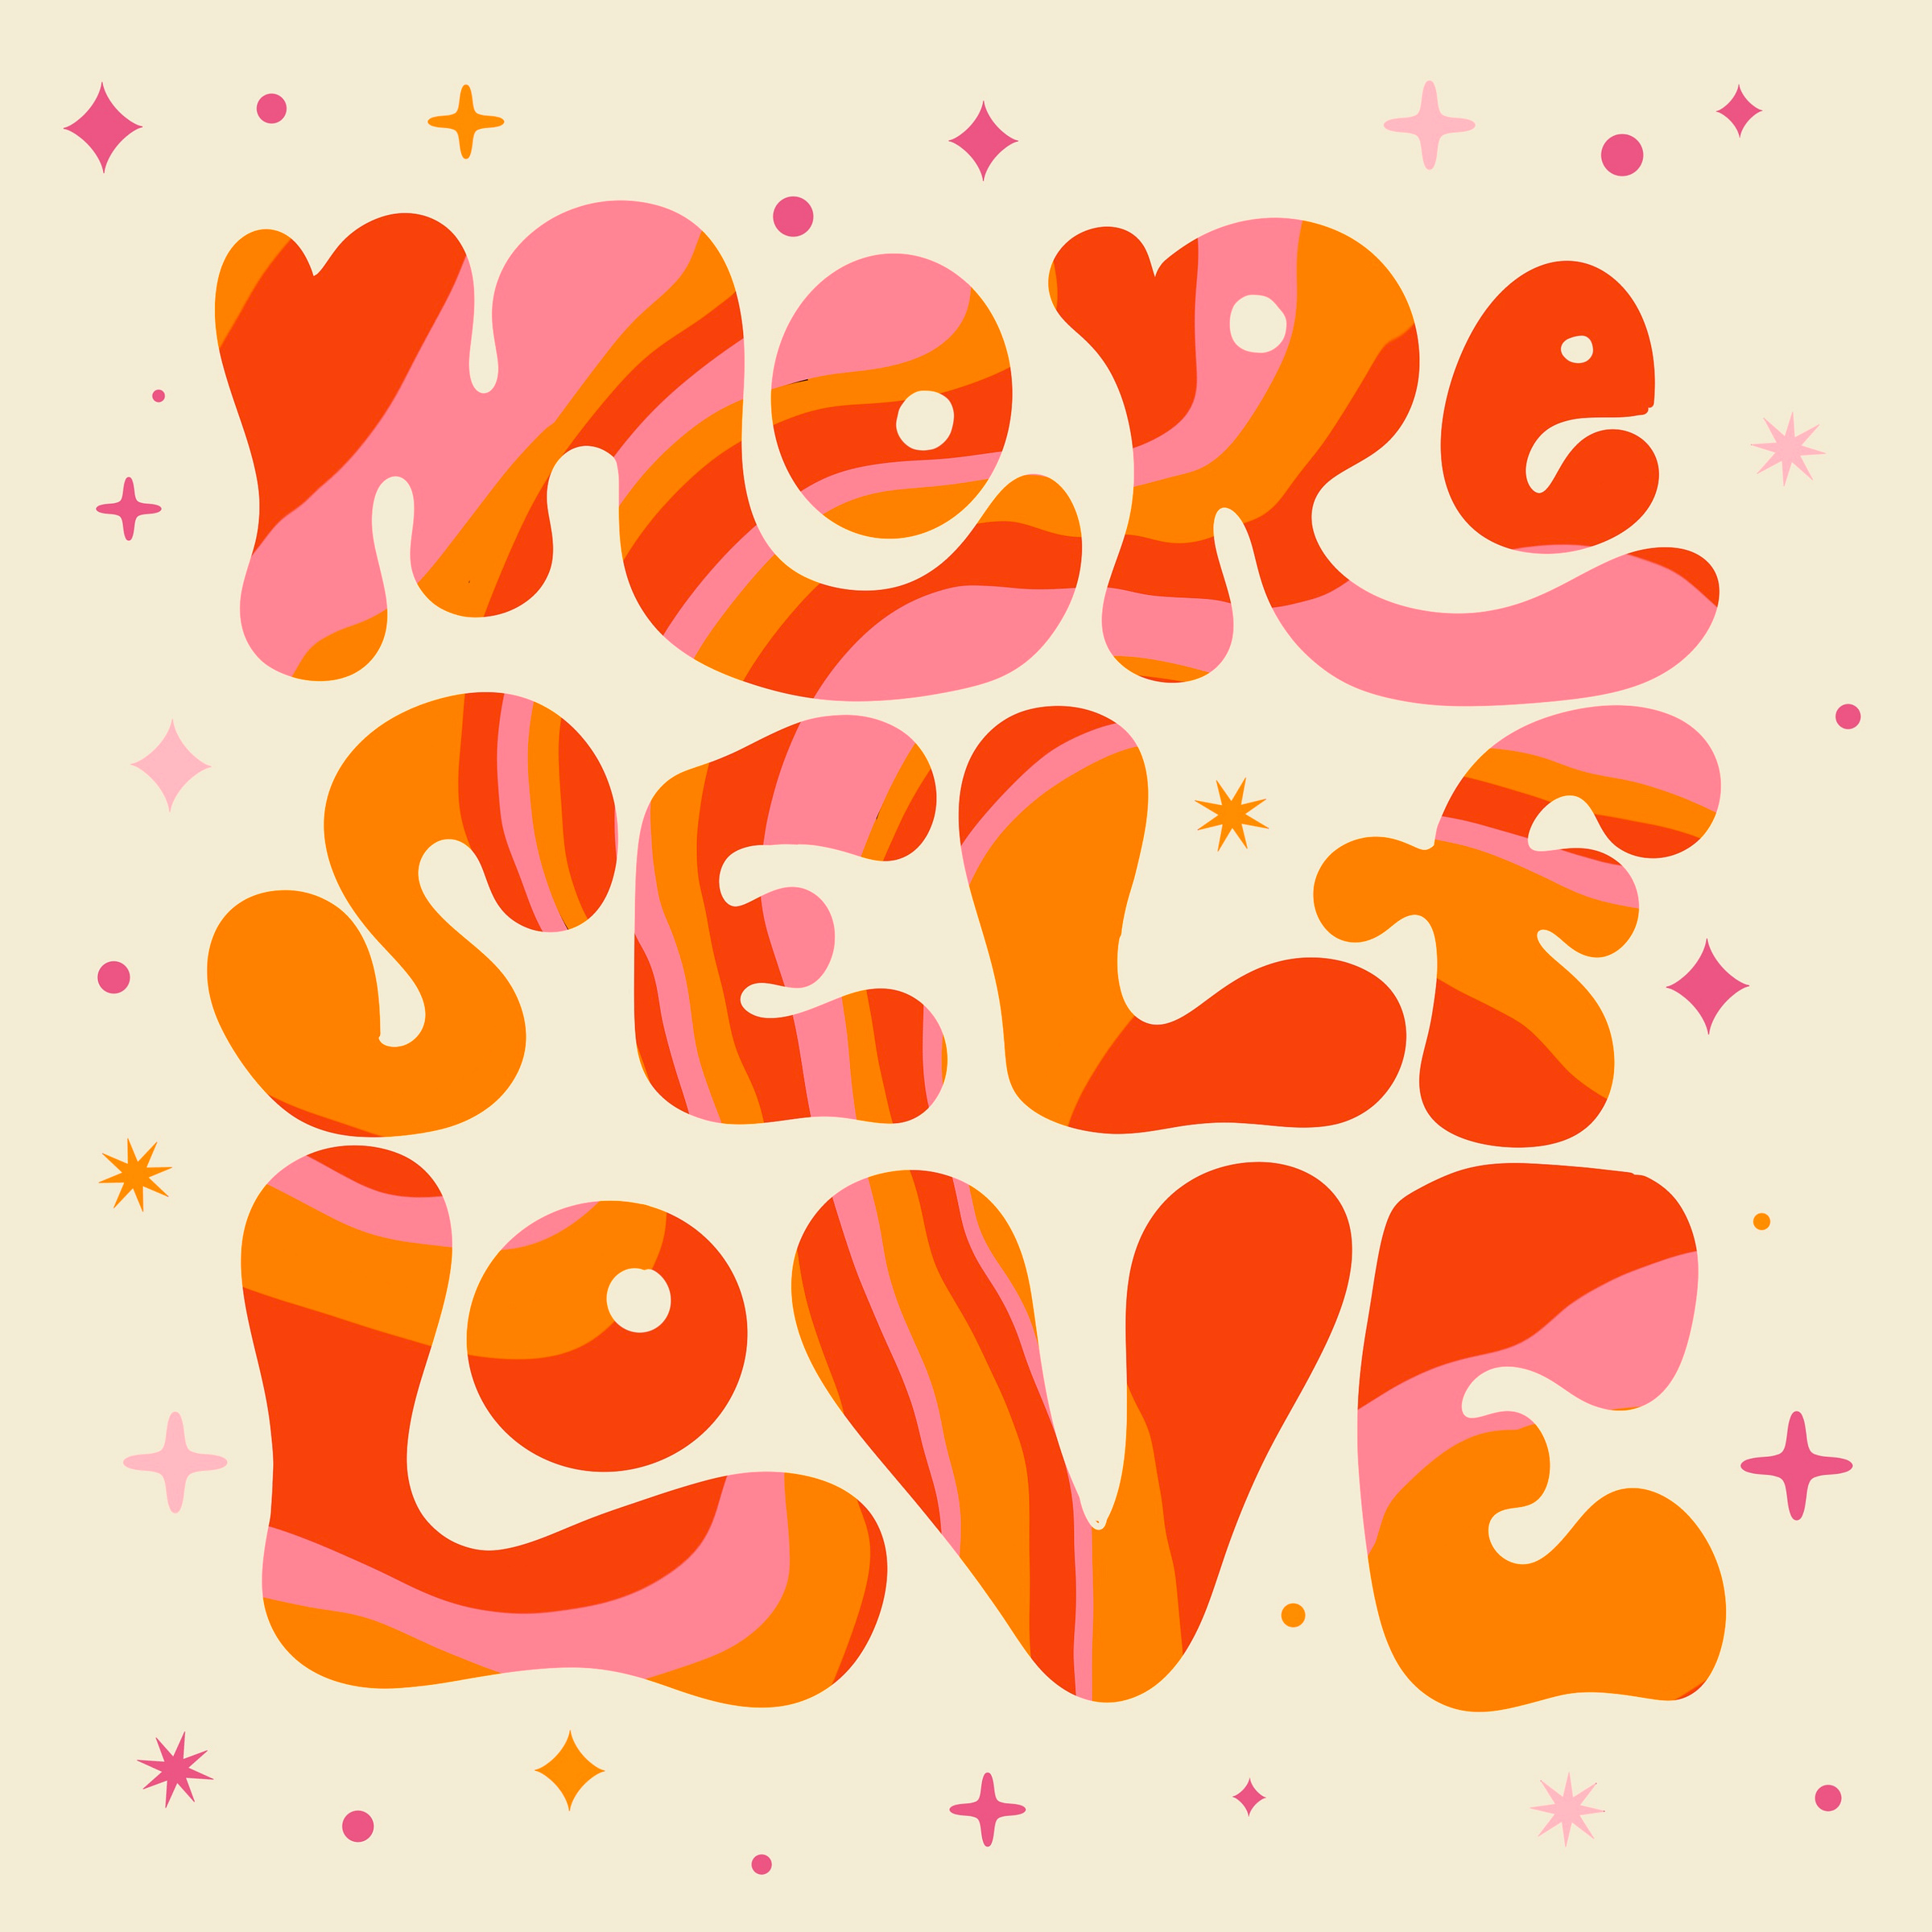 Groovy Affirmations by sarah marie finsel on Dribbble